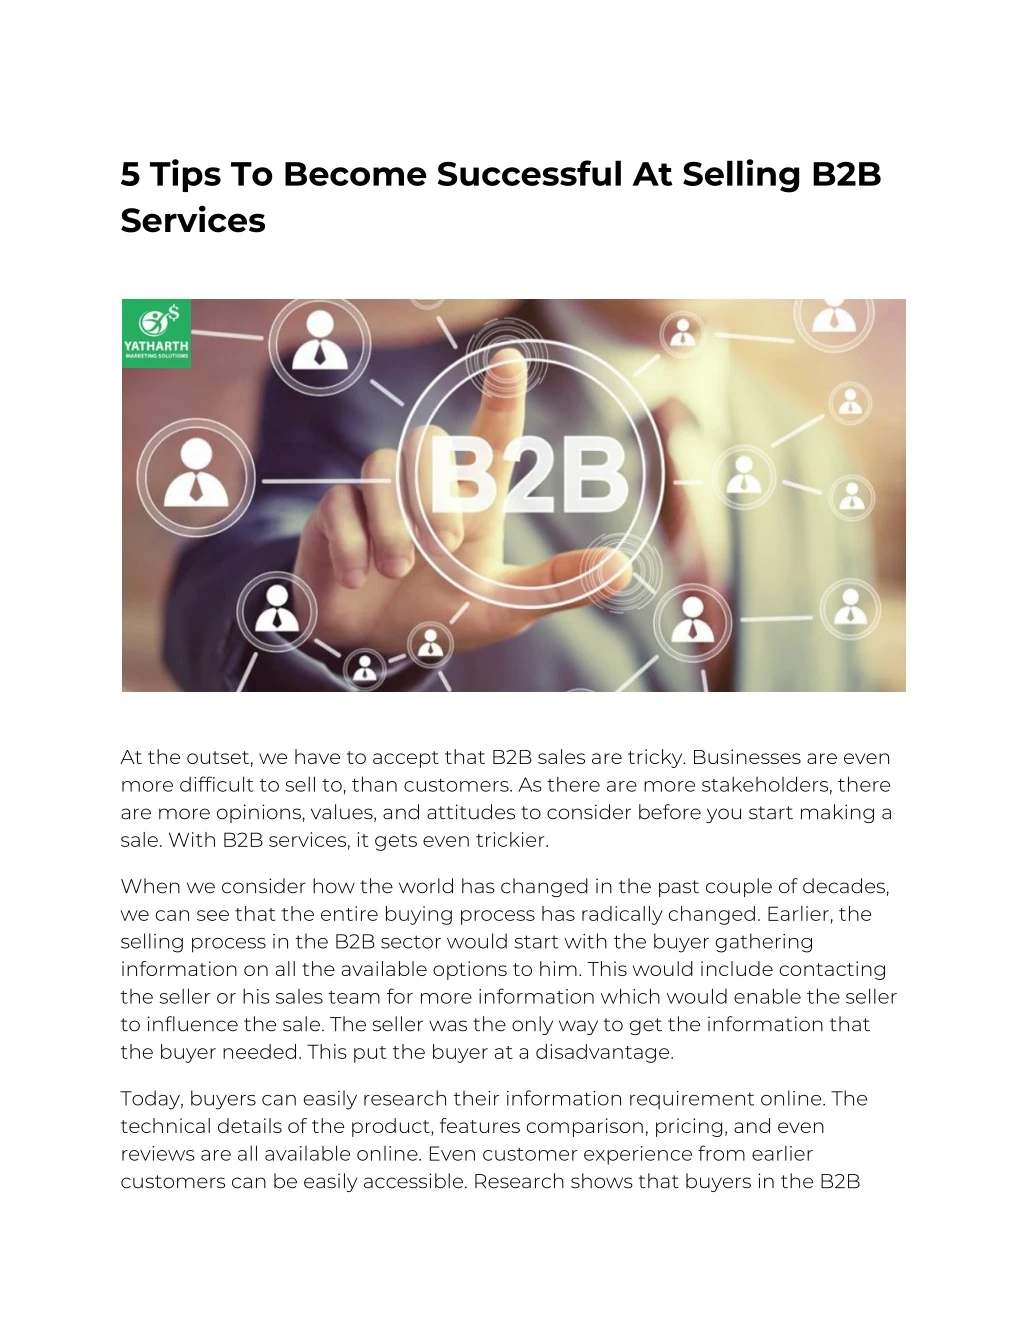 5 tips to become successful at selling